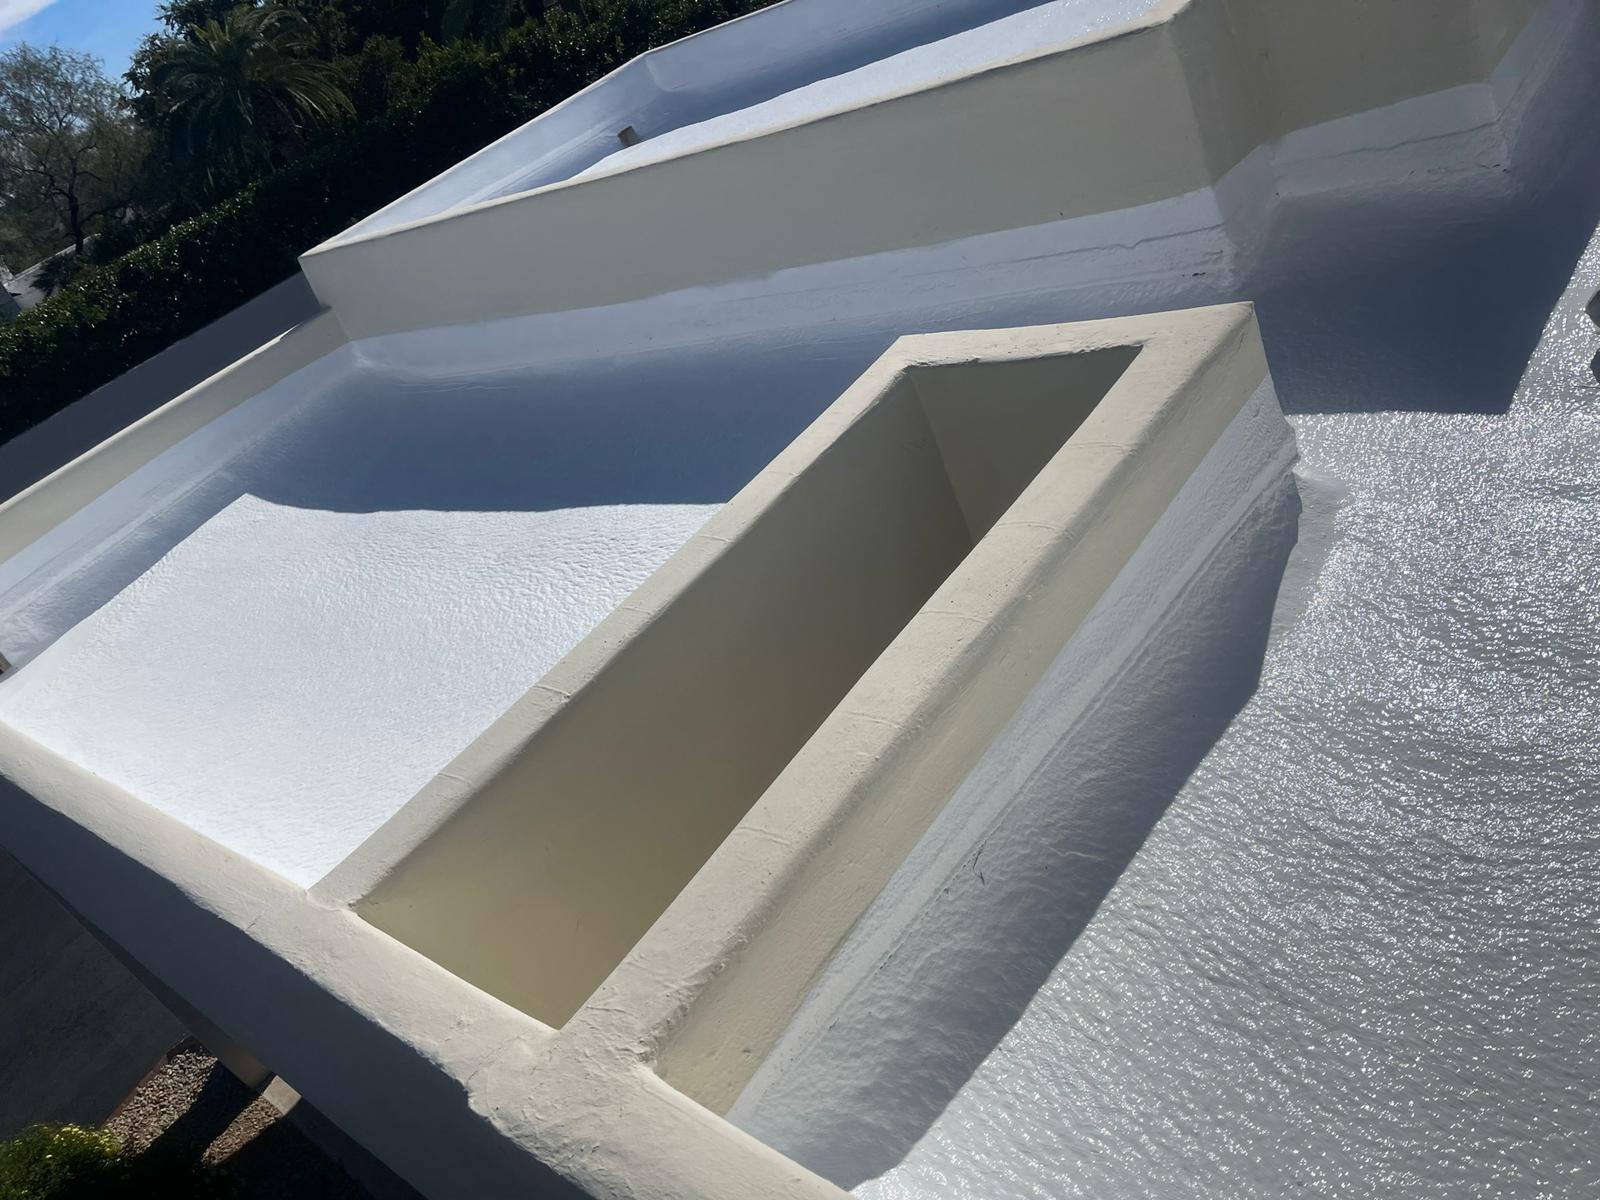 A rooftop in Fountain Hills getting a fresh application of polyurethane foam, part of a comprehensive roof recoating solution.